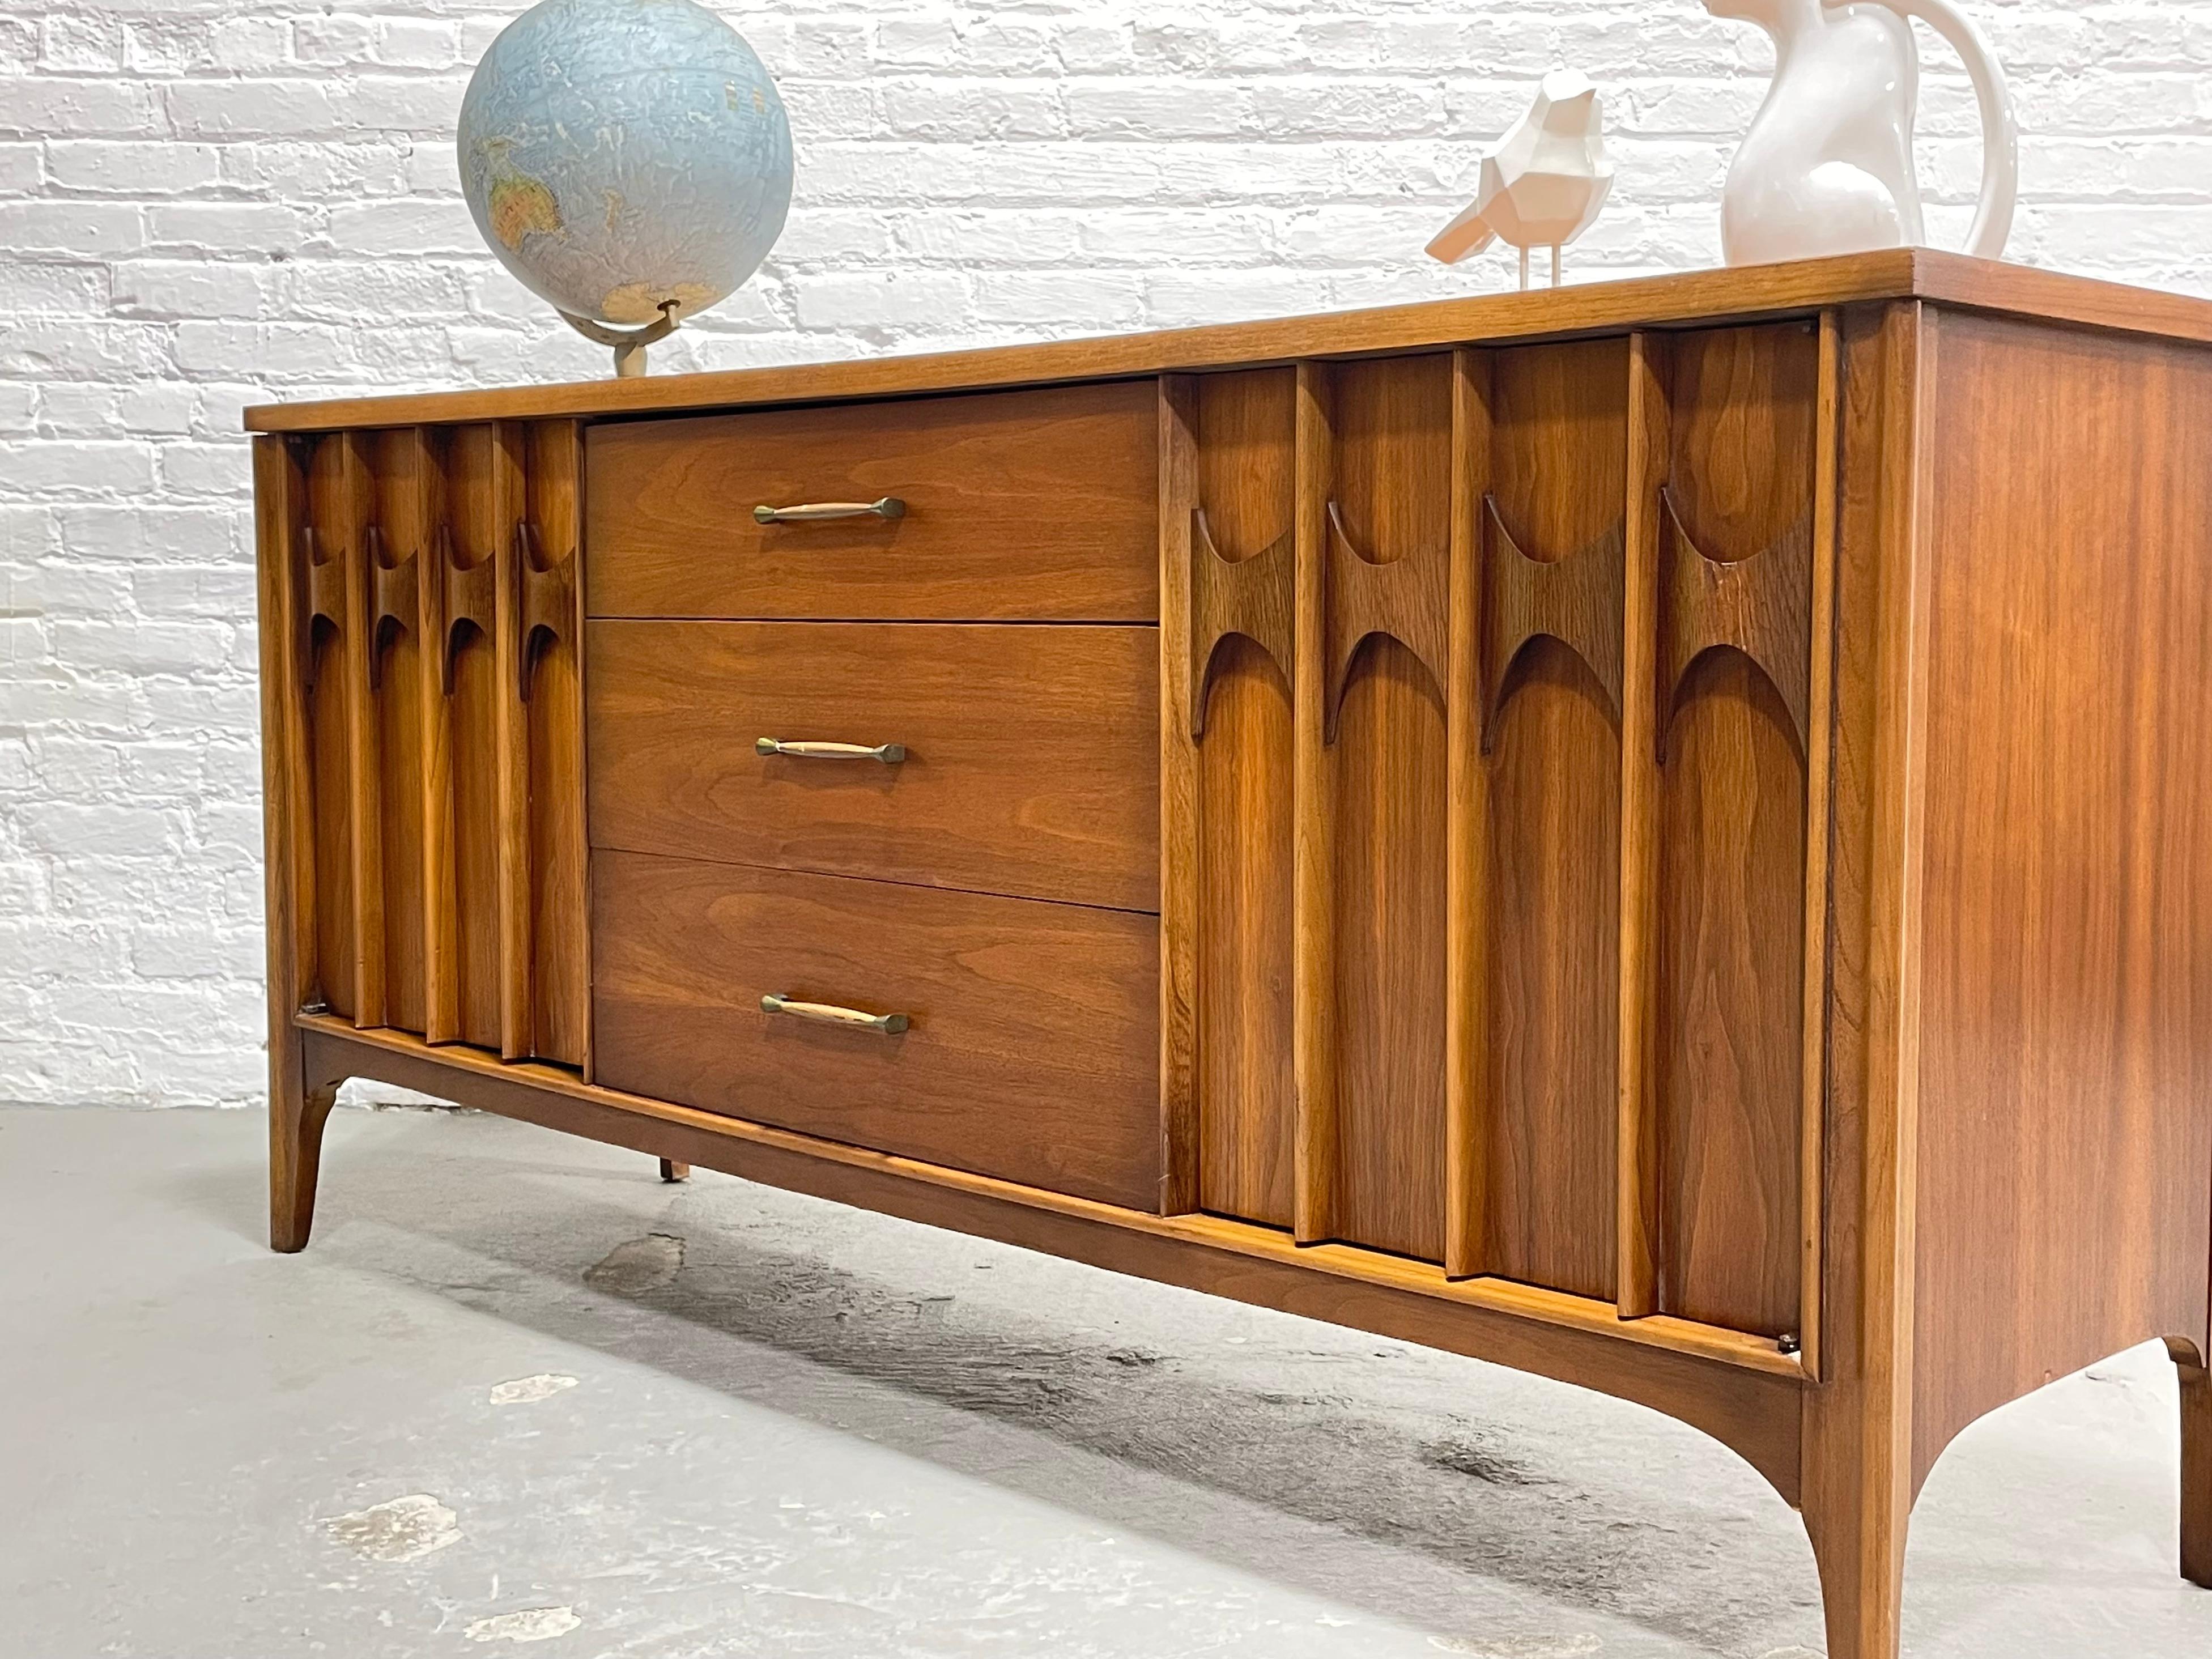 SCULPTED Mid Century MODERN CREDENZA / Long Dresser by Kent Coffey Perspecta, c. 9